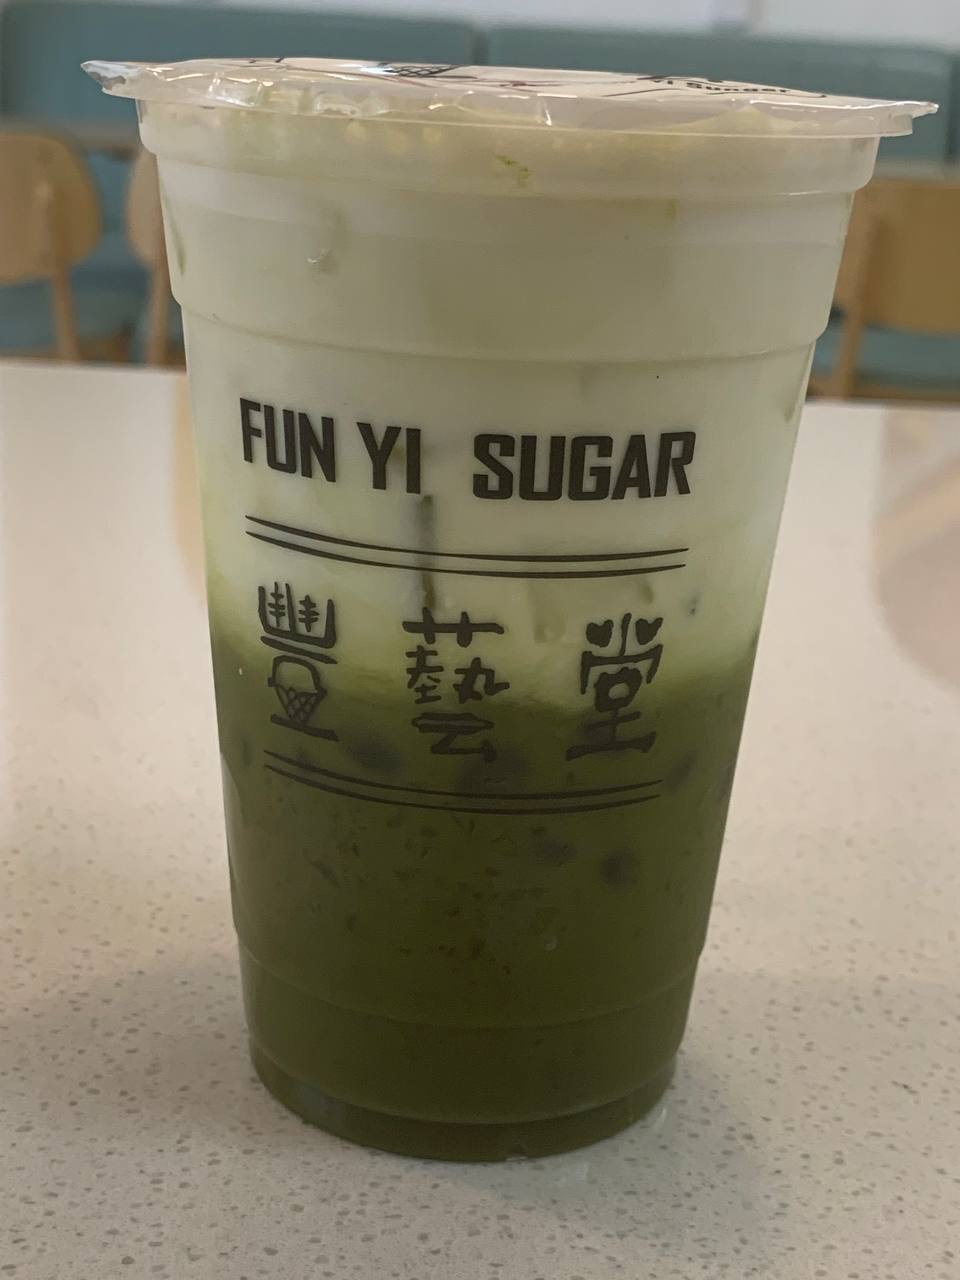 47. Matcha latte with coconut jelly